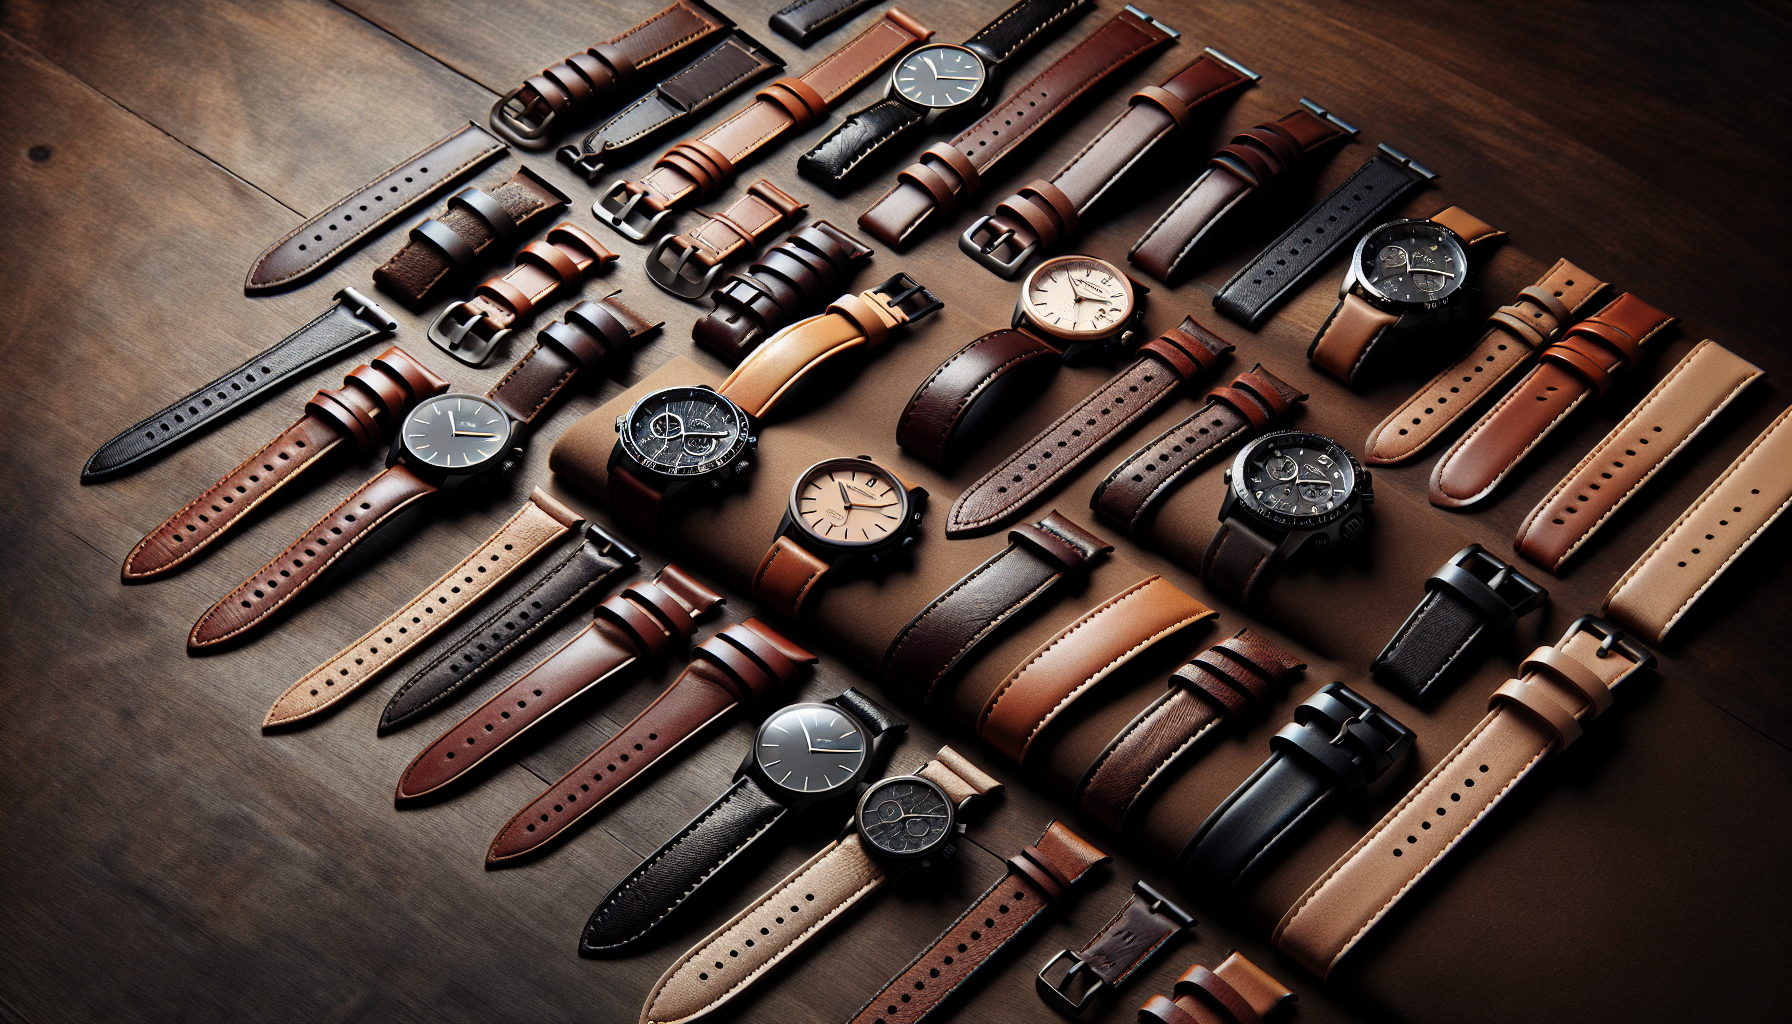 Various brown leather watch bands displayed in an elegant arrangement